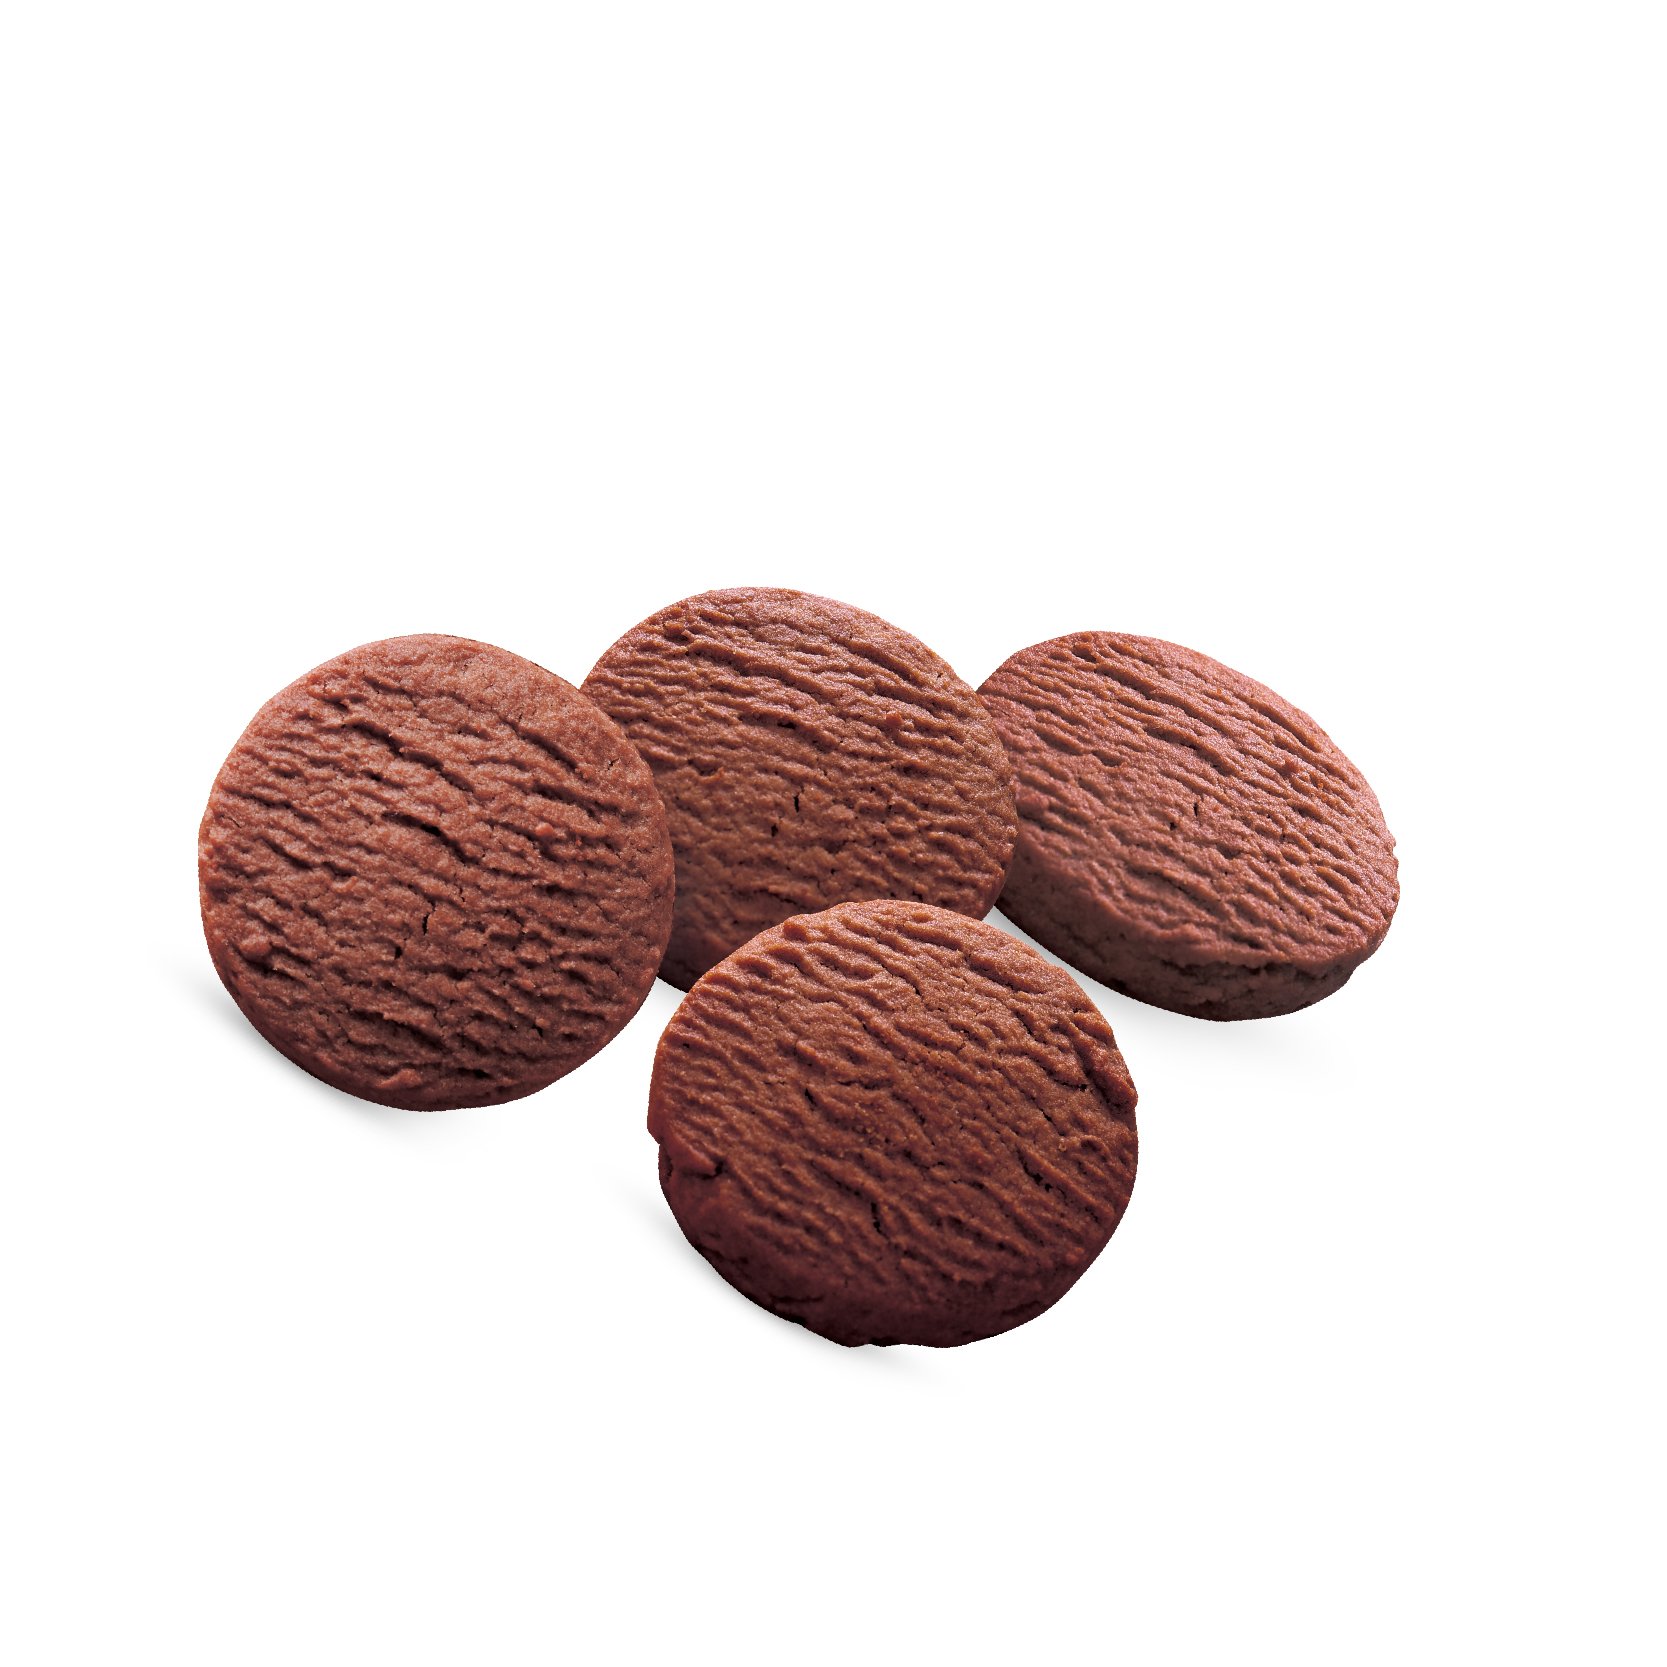 Chocolate Butter Cookies 82g 